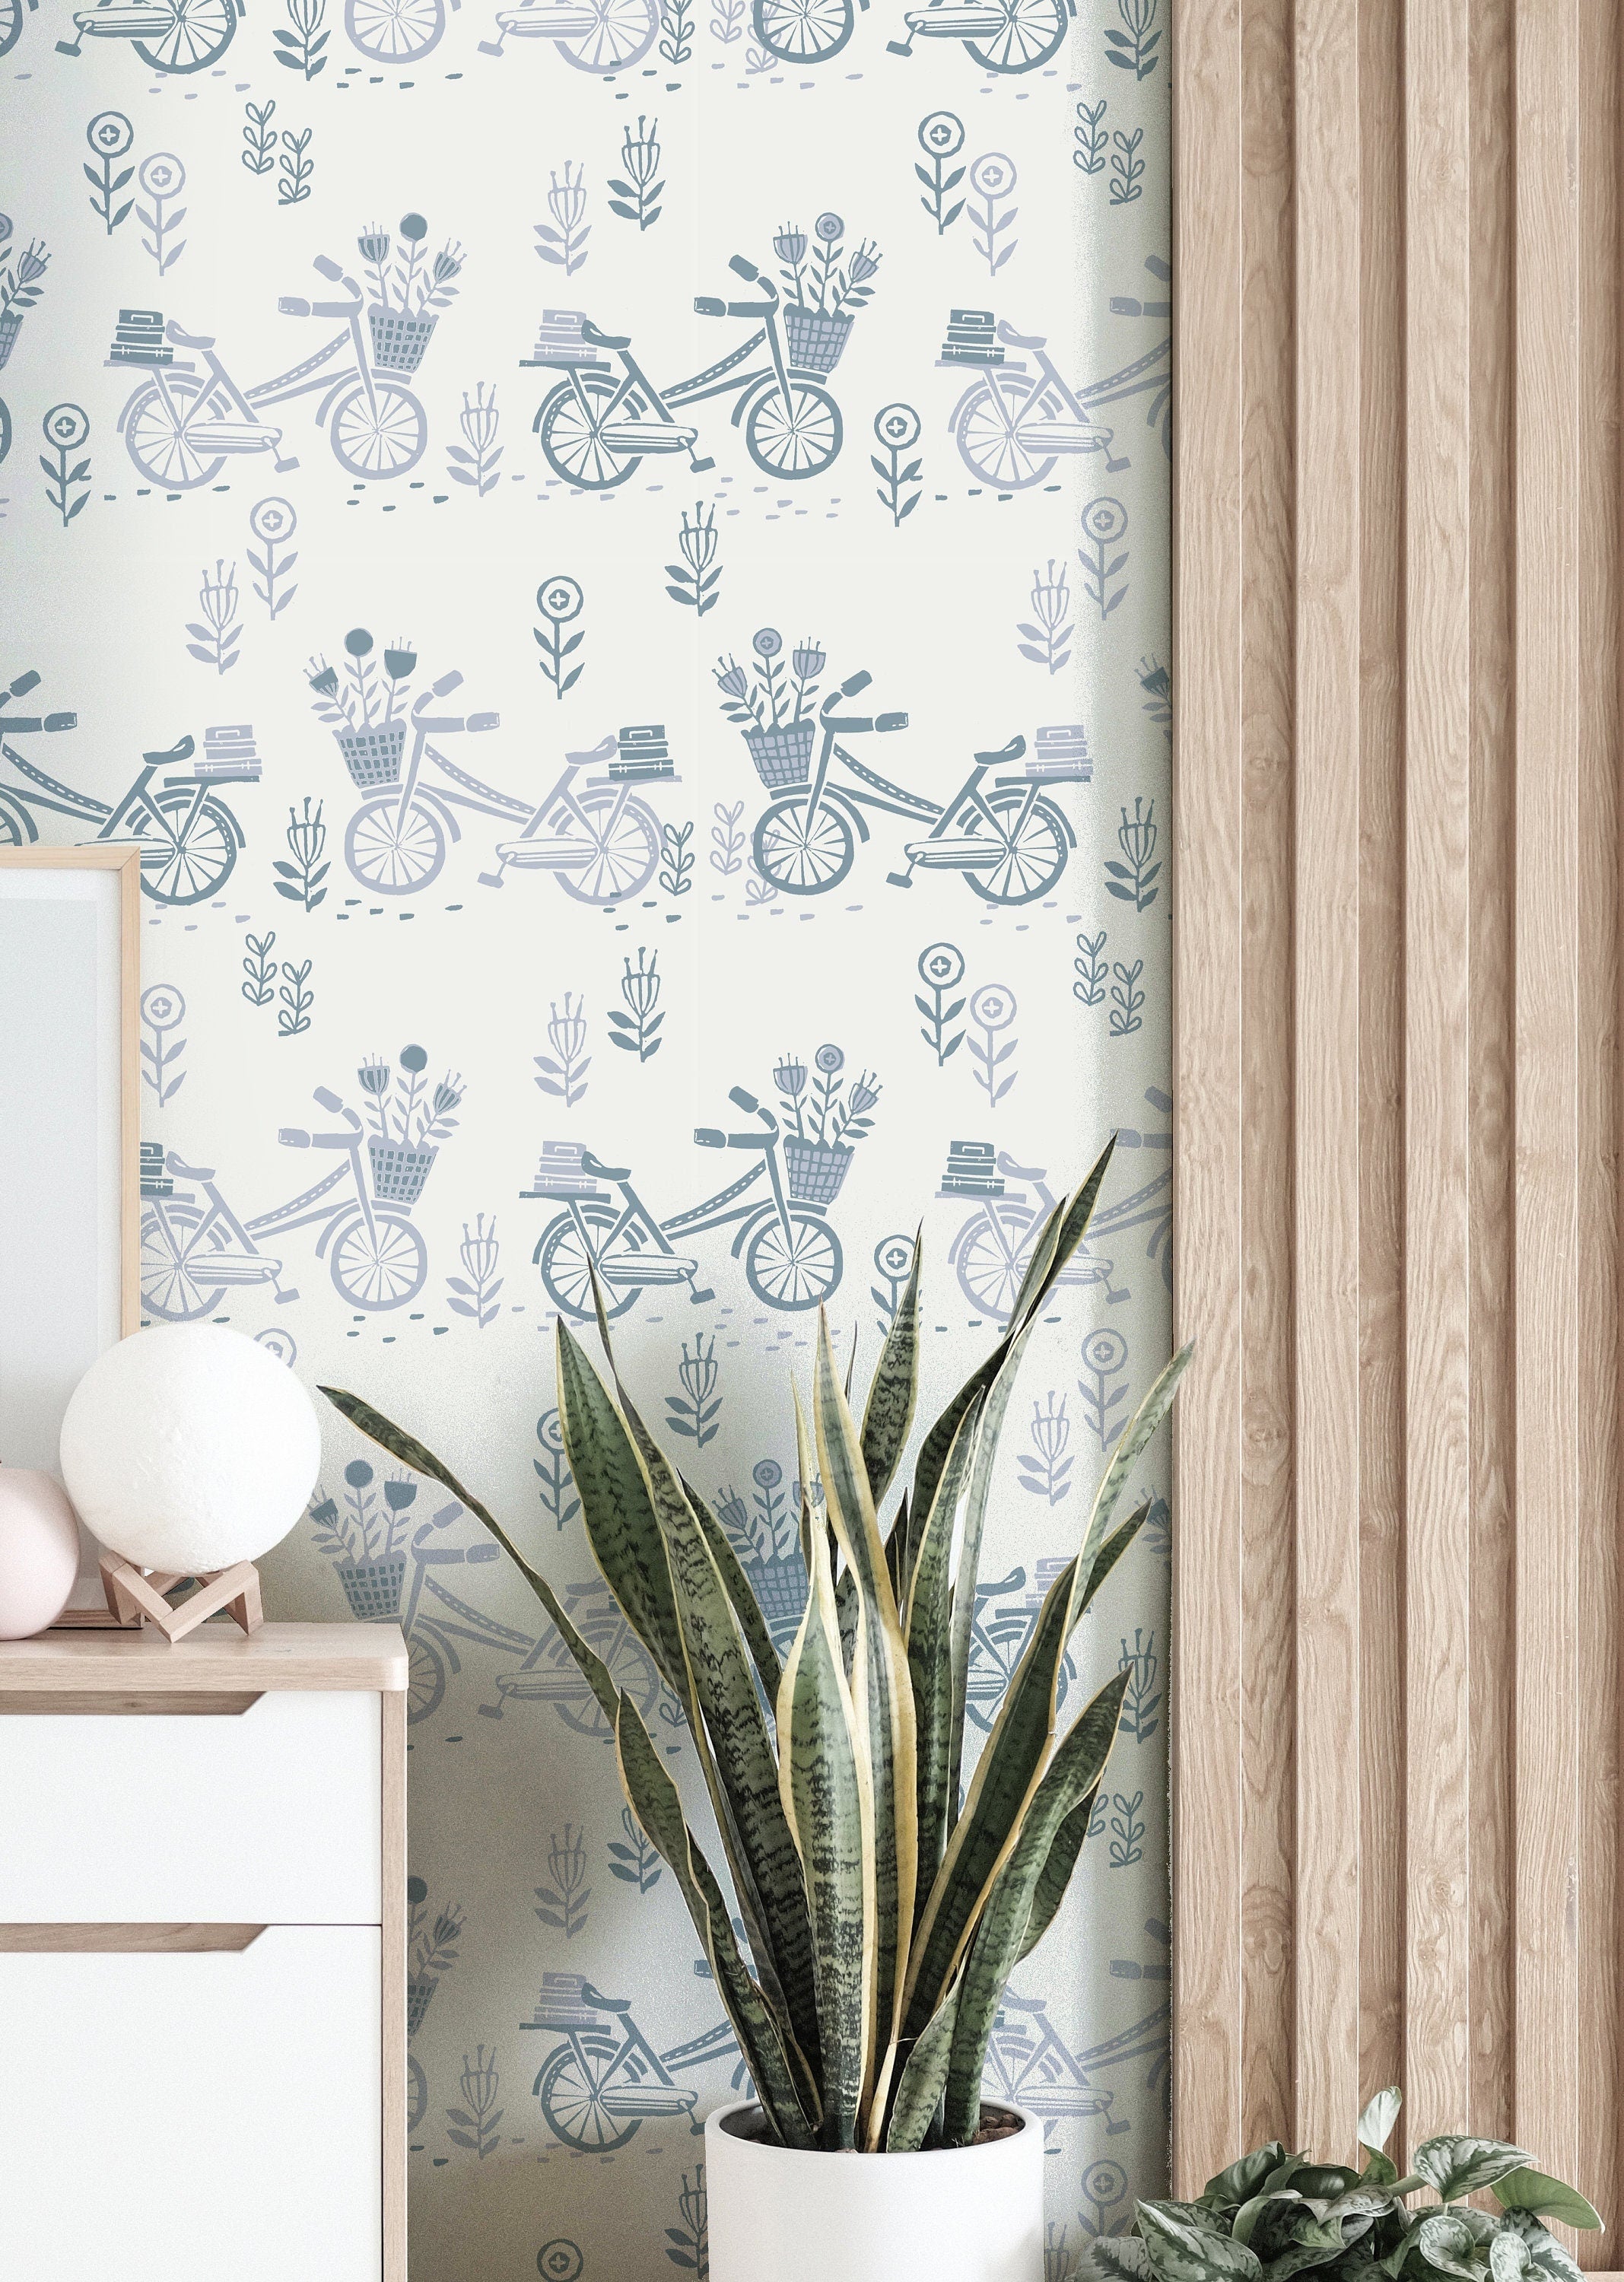 Wallpaper Peel and Stick Wallpaper Muted Blue Bicycles Floral Removable Wallpaper Wall Decor Home Decor Wall Art Room Decor 3749 - JamesAndColors